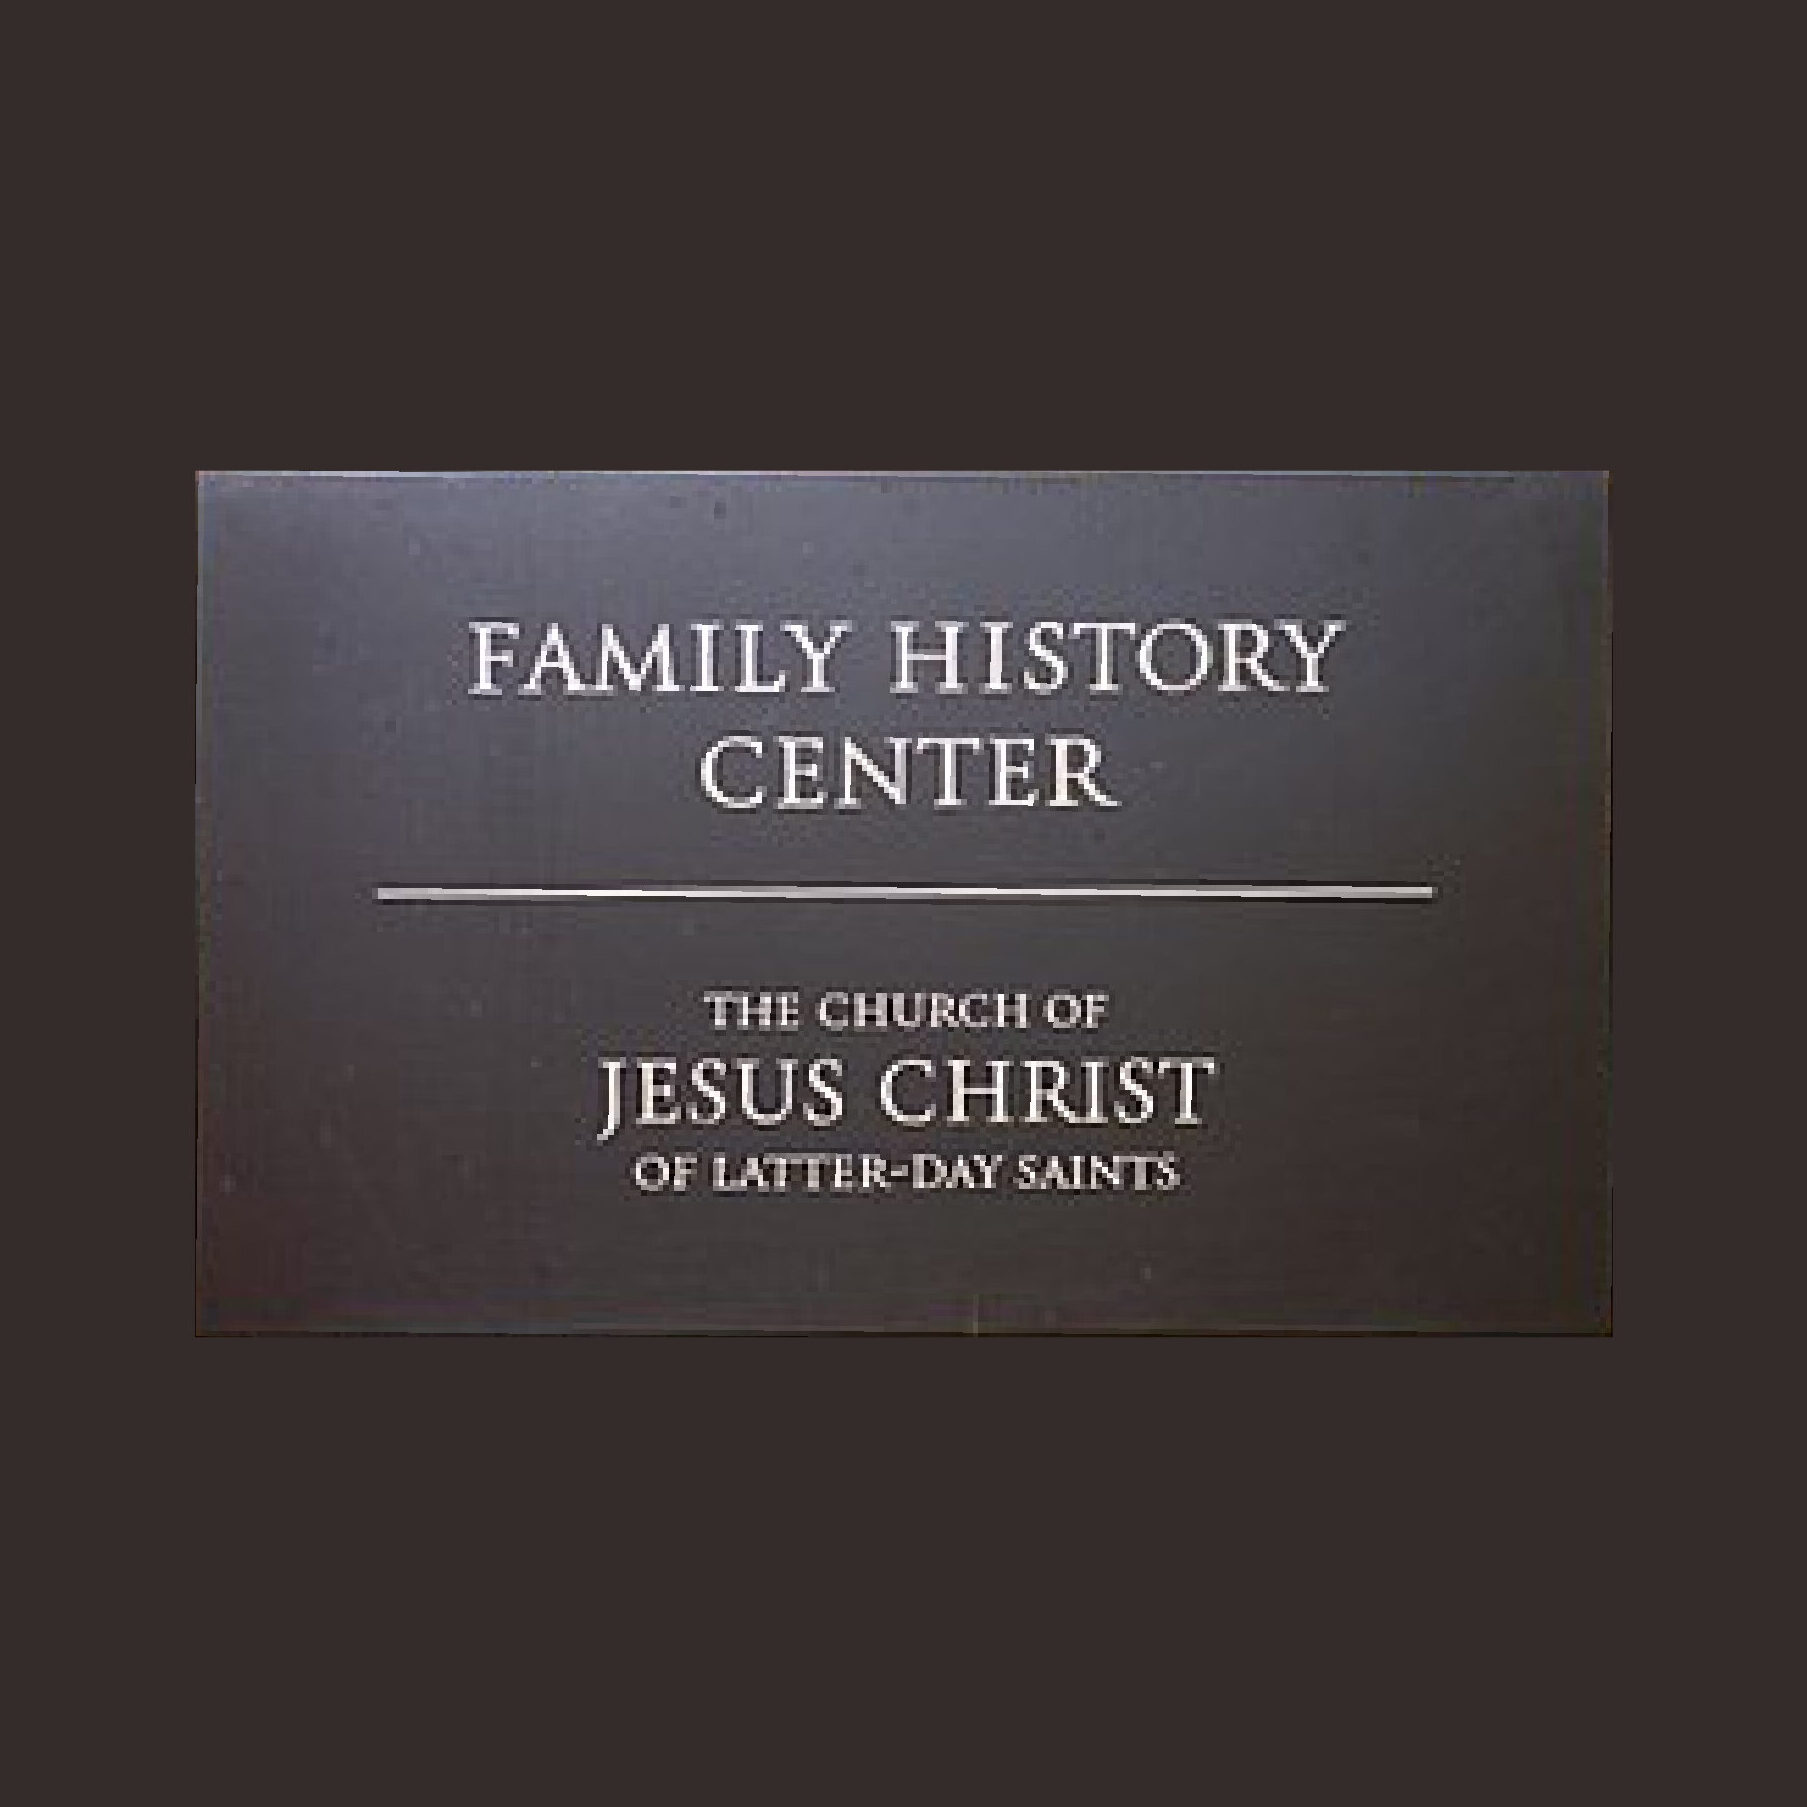 Click to open The Church of Jesus Christ of Latter-day Saints website in a new tab